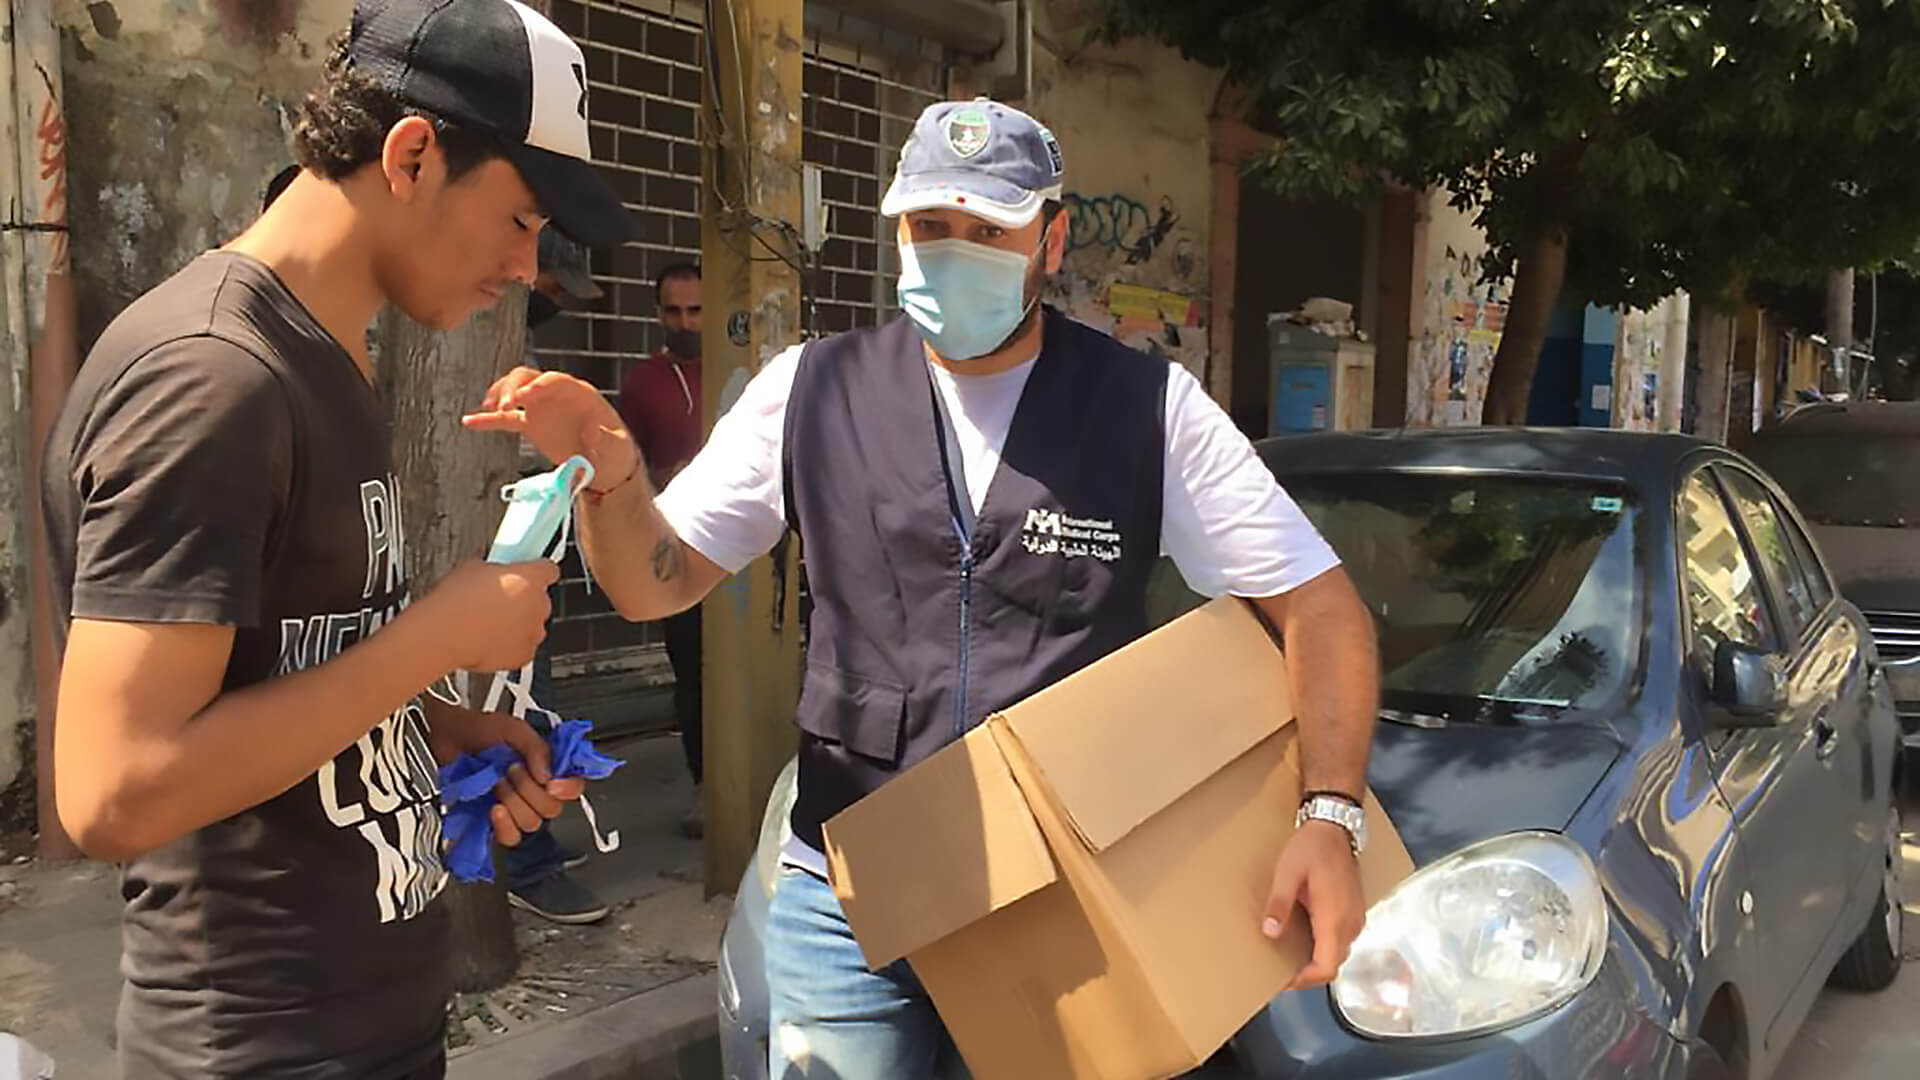 To help prevent COVID-19, International Medical Corps' field teams are distributing personal protective equipment and hygiene supplies to the volunteers who are cleaning up areas in Beirut affected by the port explosion.